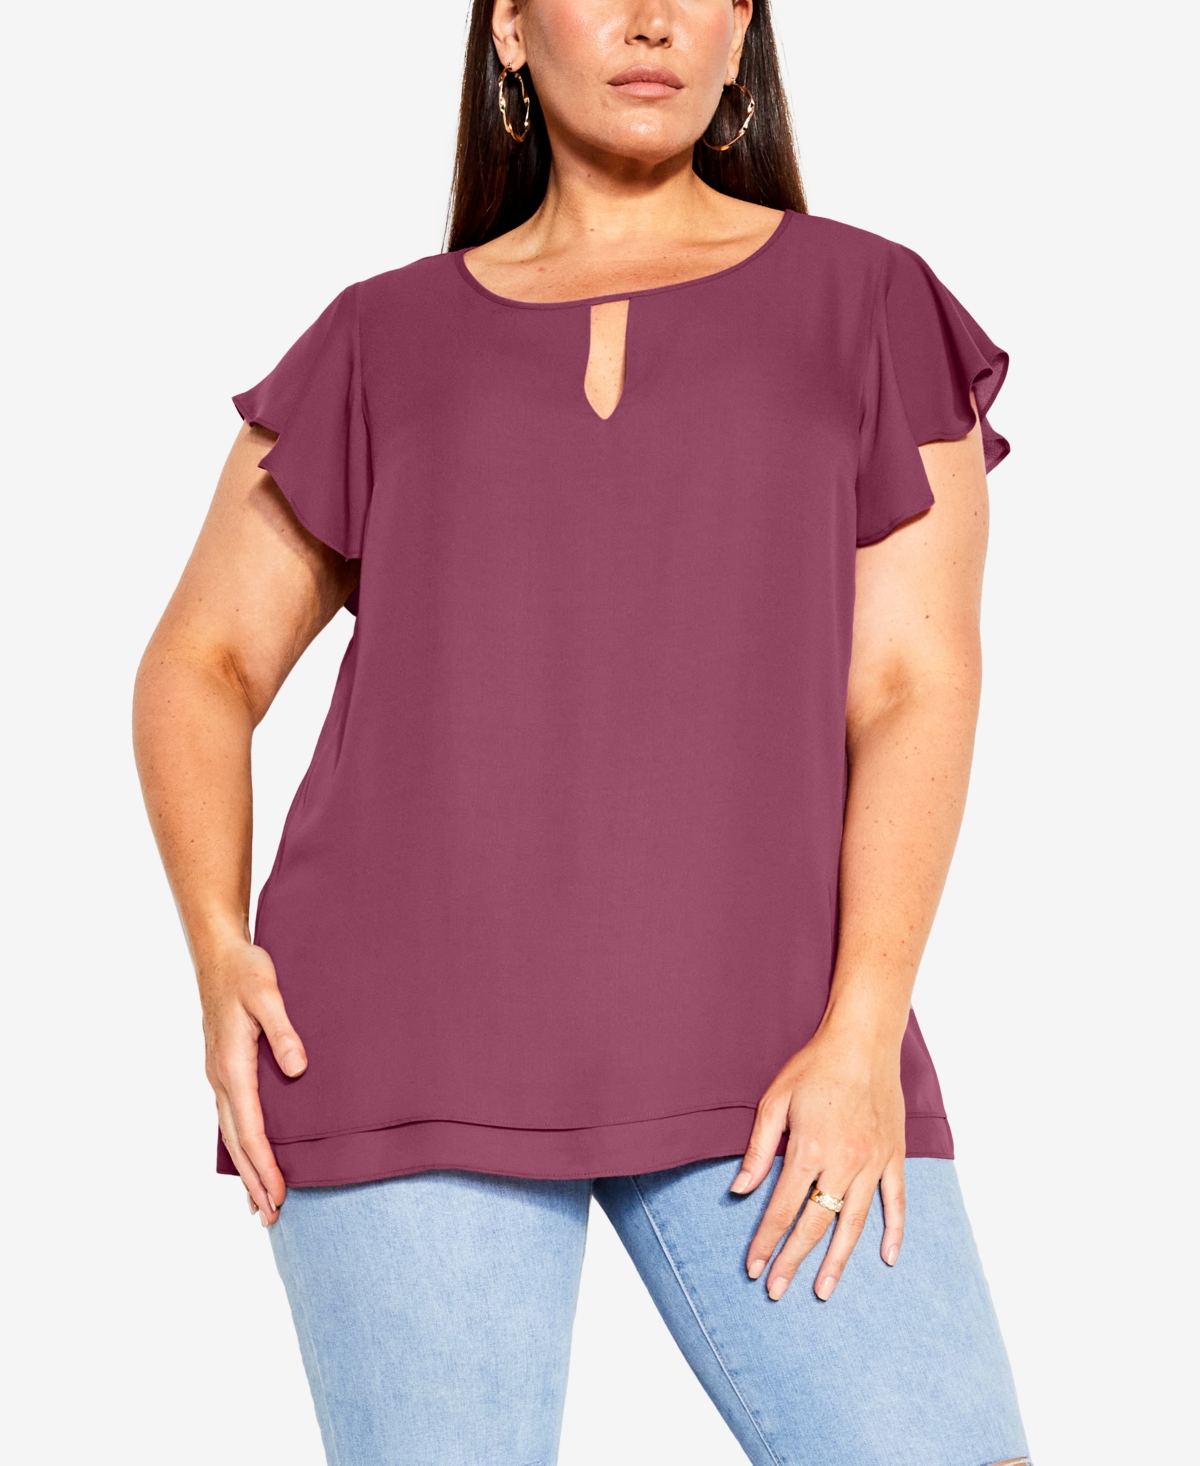 CITY CHIC TRENDY PLUS SIZE SWEET WATERFALL SHORT SLEEVE TOP